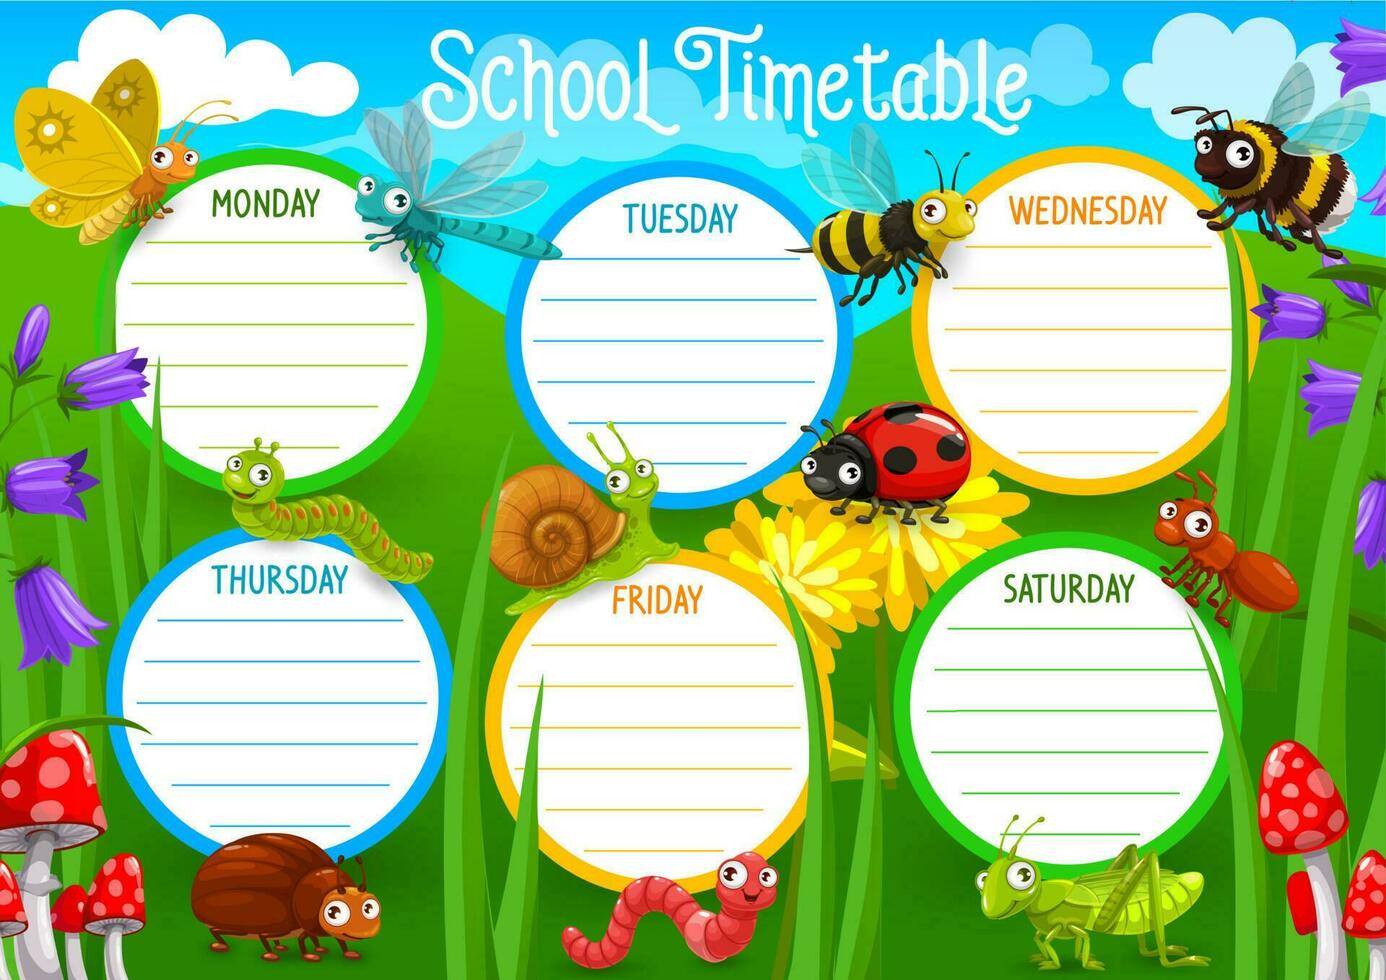 School timetable, planner with insects characters vector